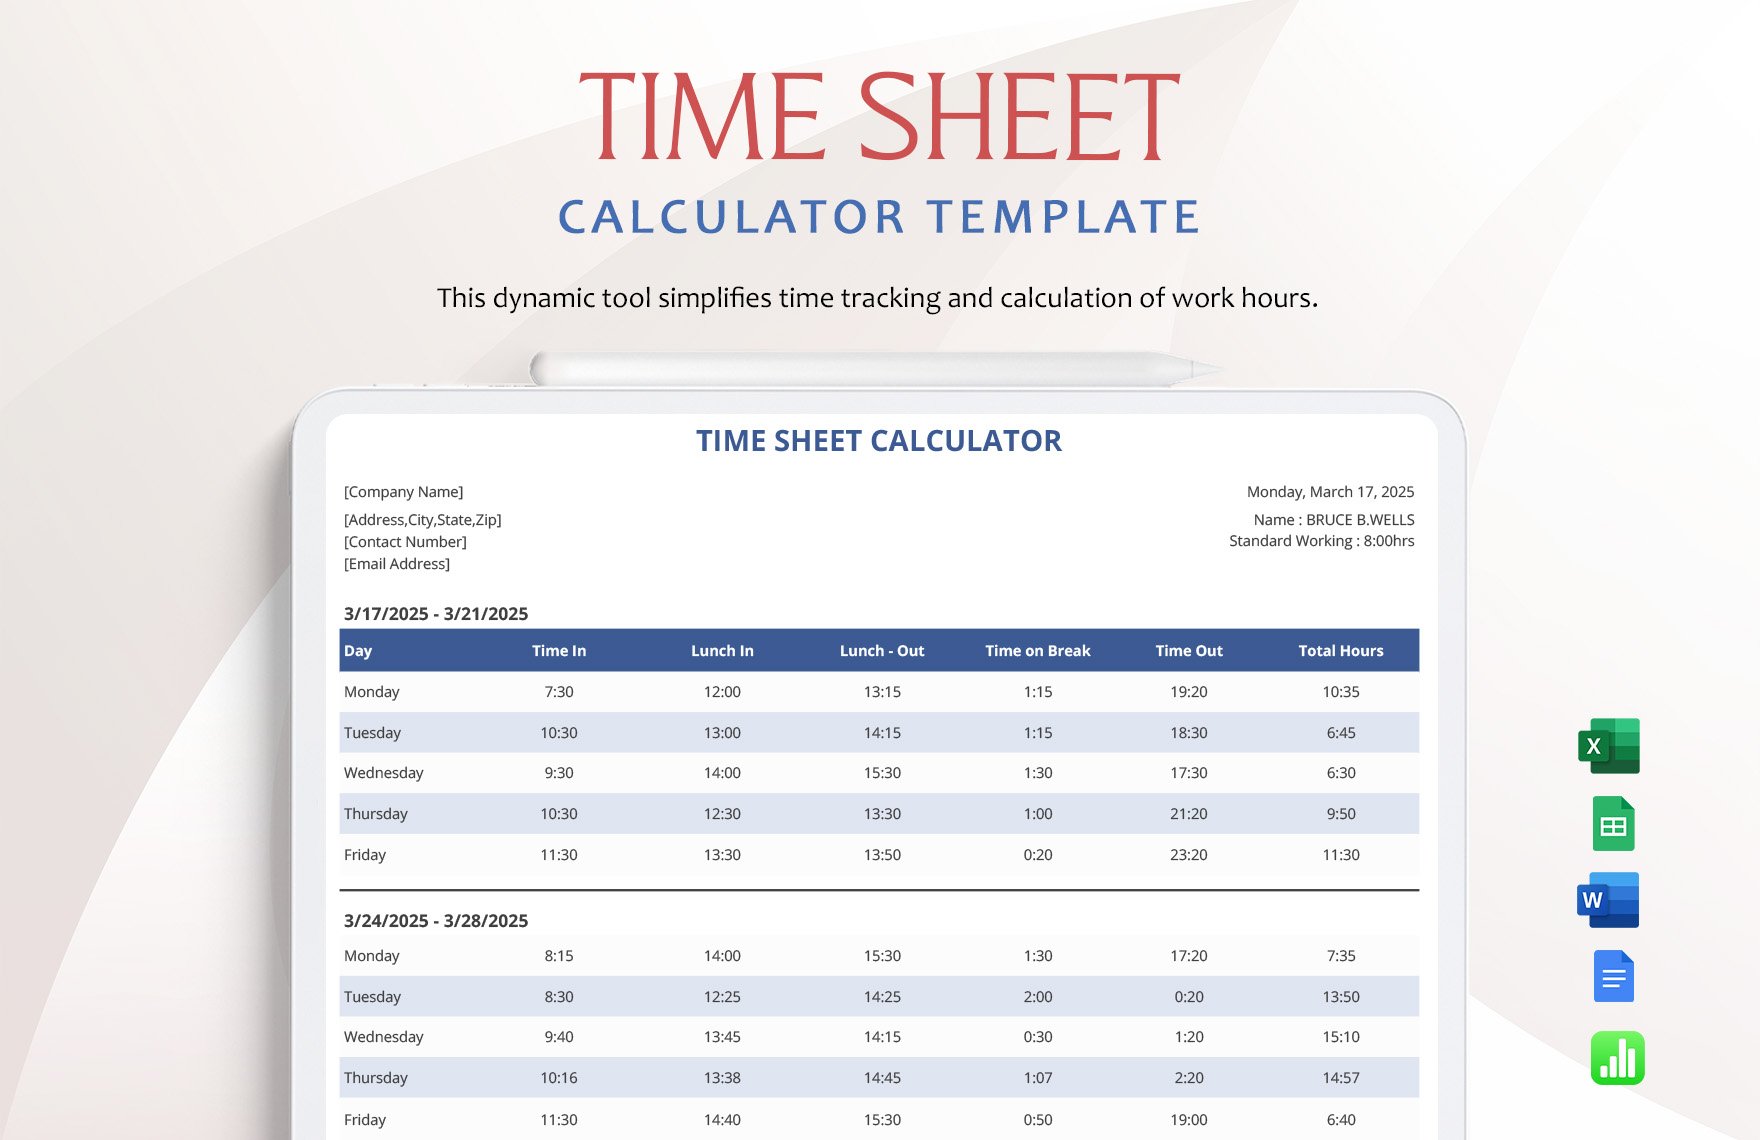 Time Sheet Calculator Template in Word, Google Docs, Excel, Google Sheets, Apple Numbers